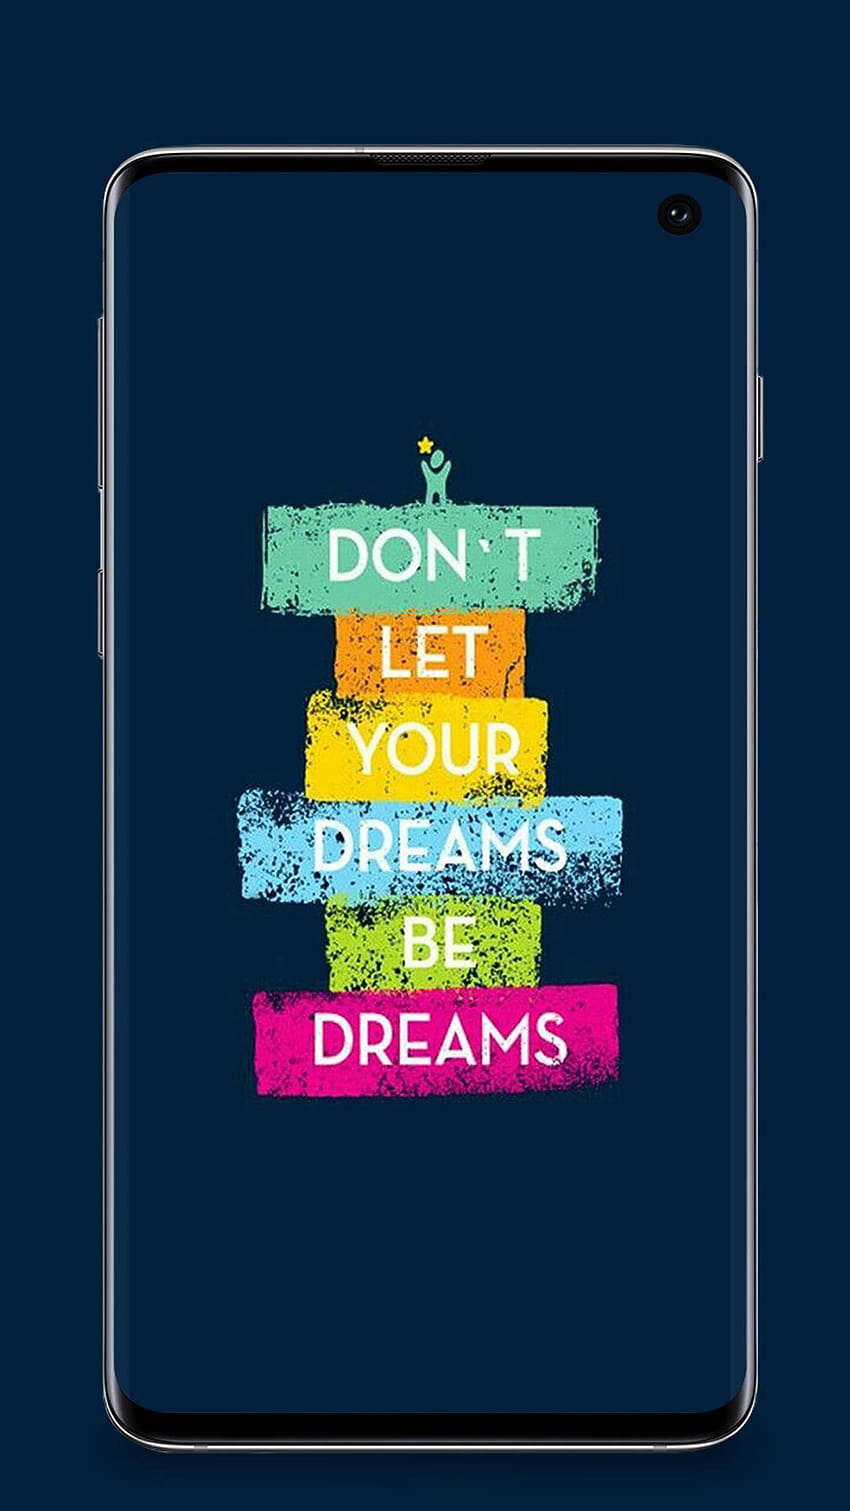 100 Inspirational And Motivational iPhone / Android HD Wallpapers Quotes